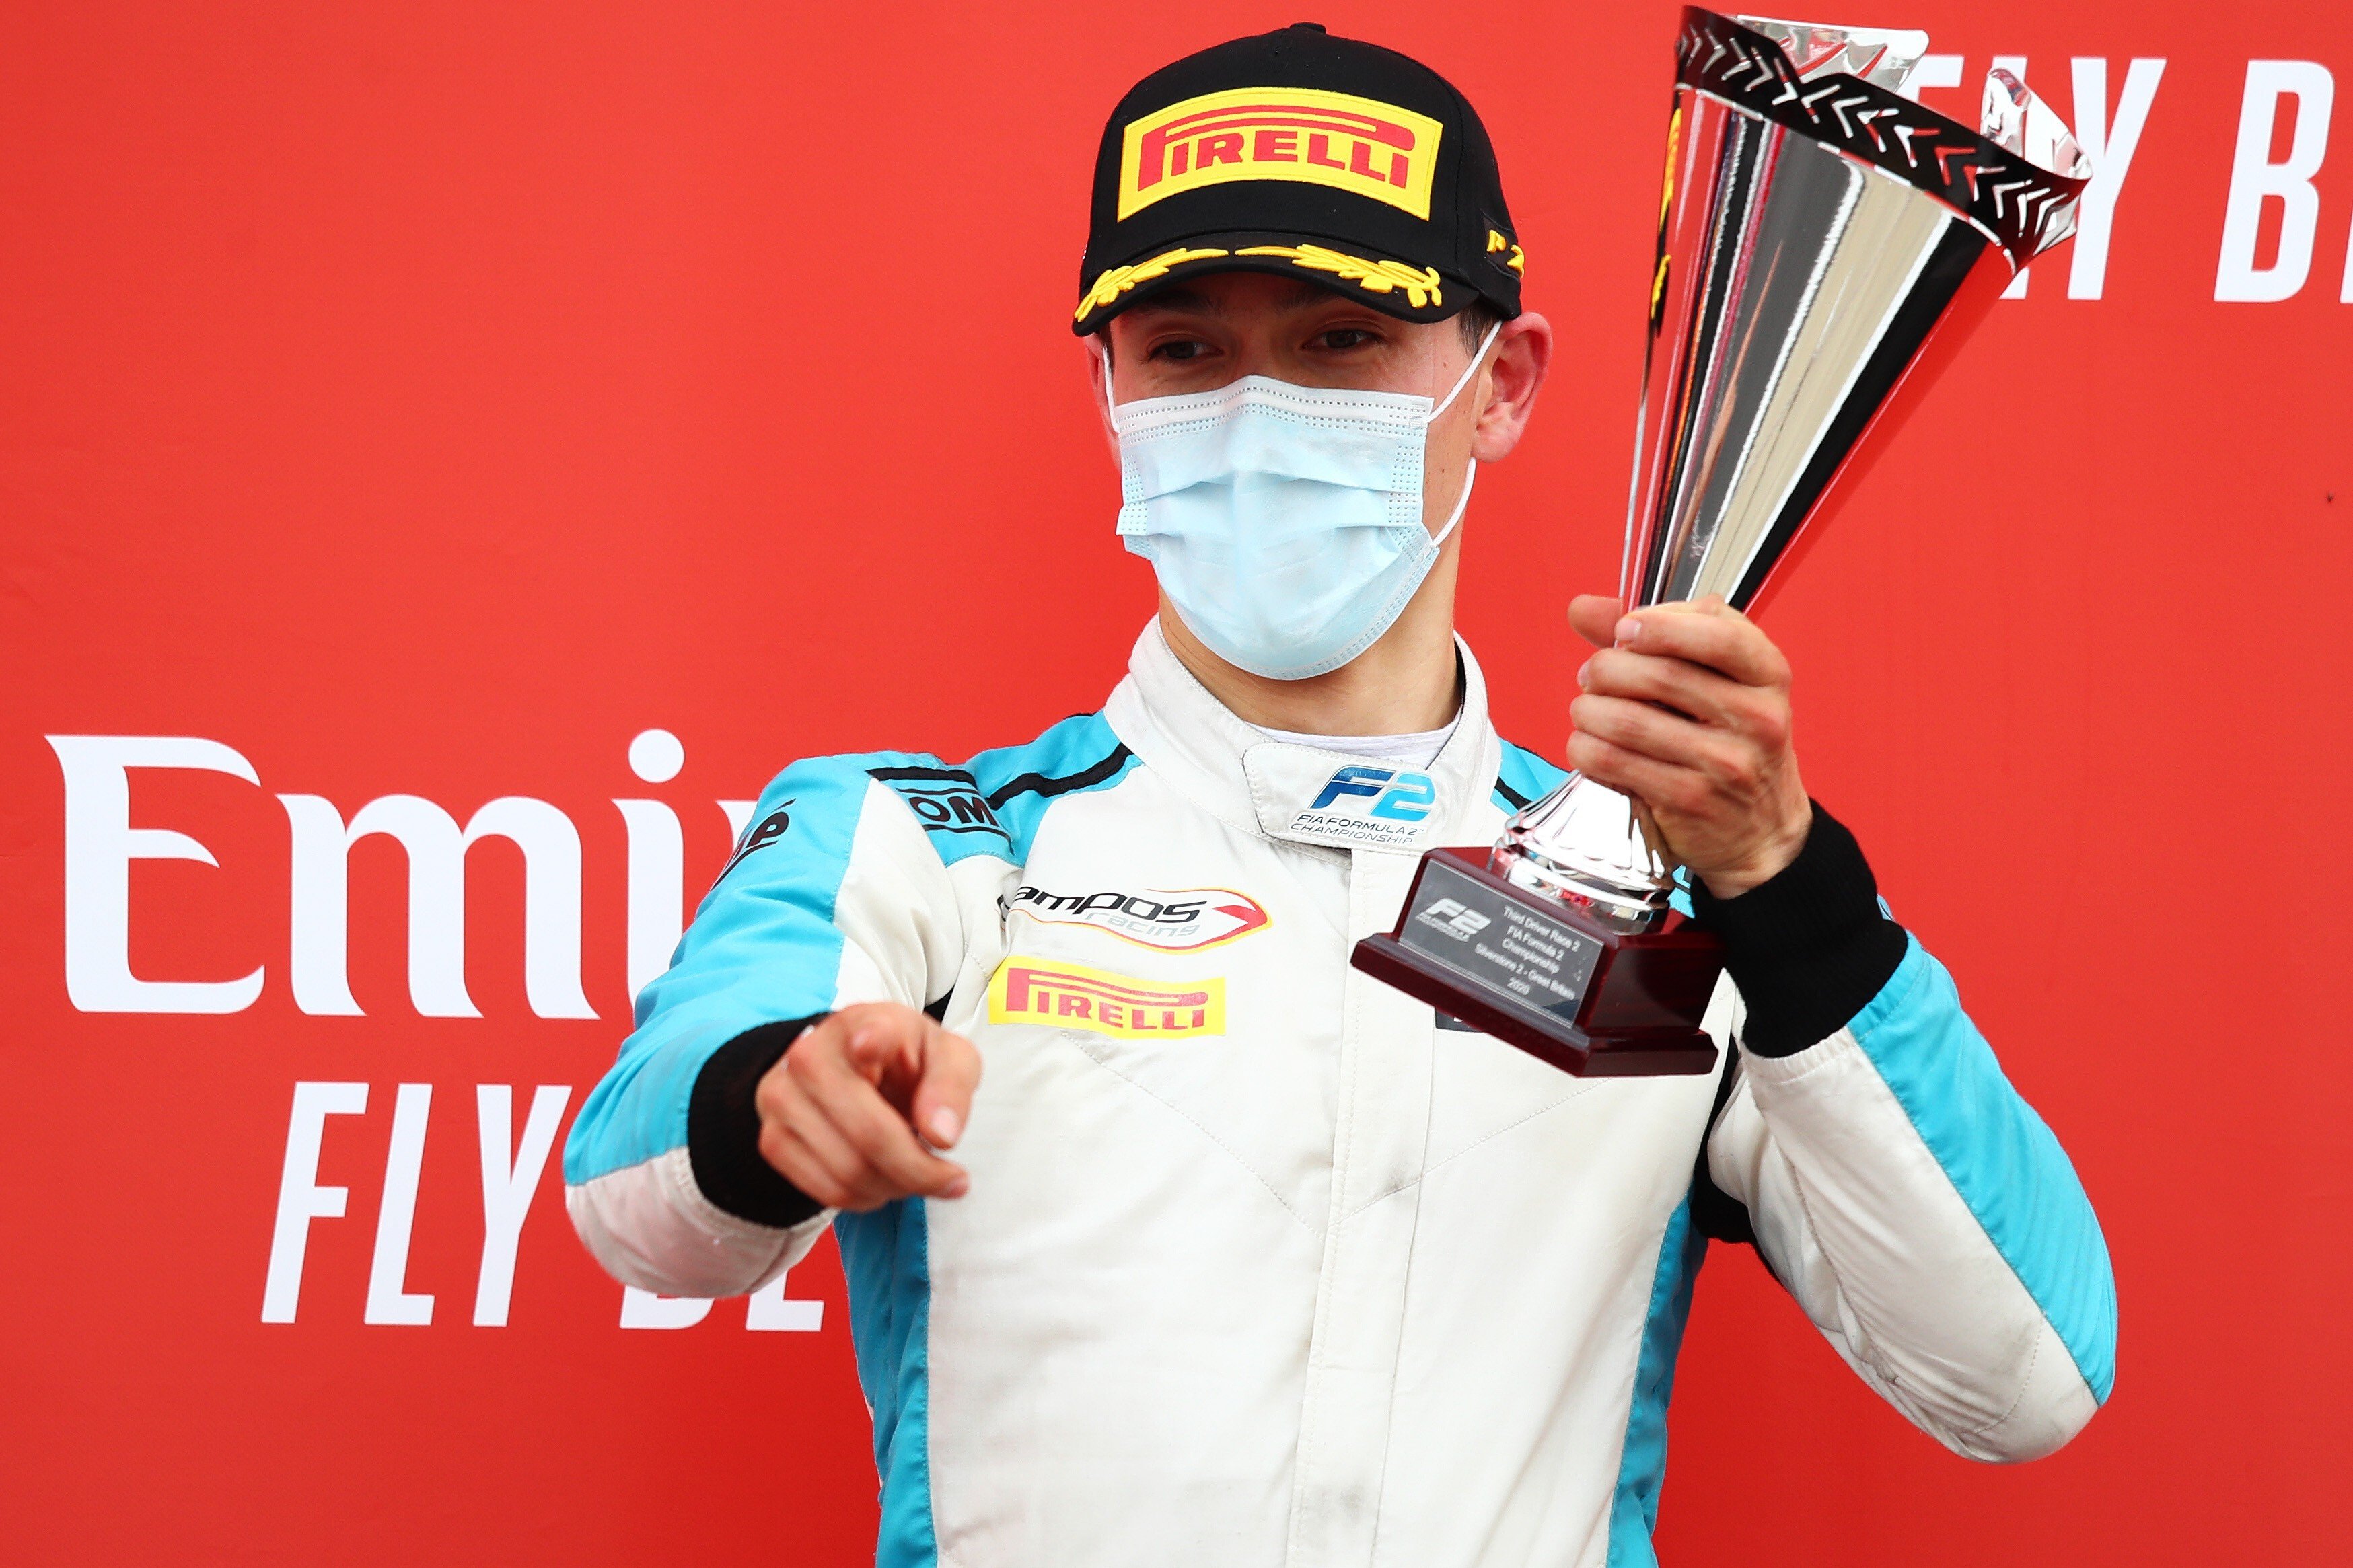 Jack Aitken celebrates on the podium after the sprint race of the Formula 2 Championship at Silverstone in August 2020. Photo: Joe Portlock - Formula 1/Formula 1 via Getty Images